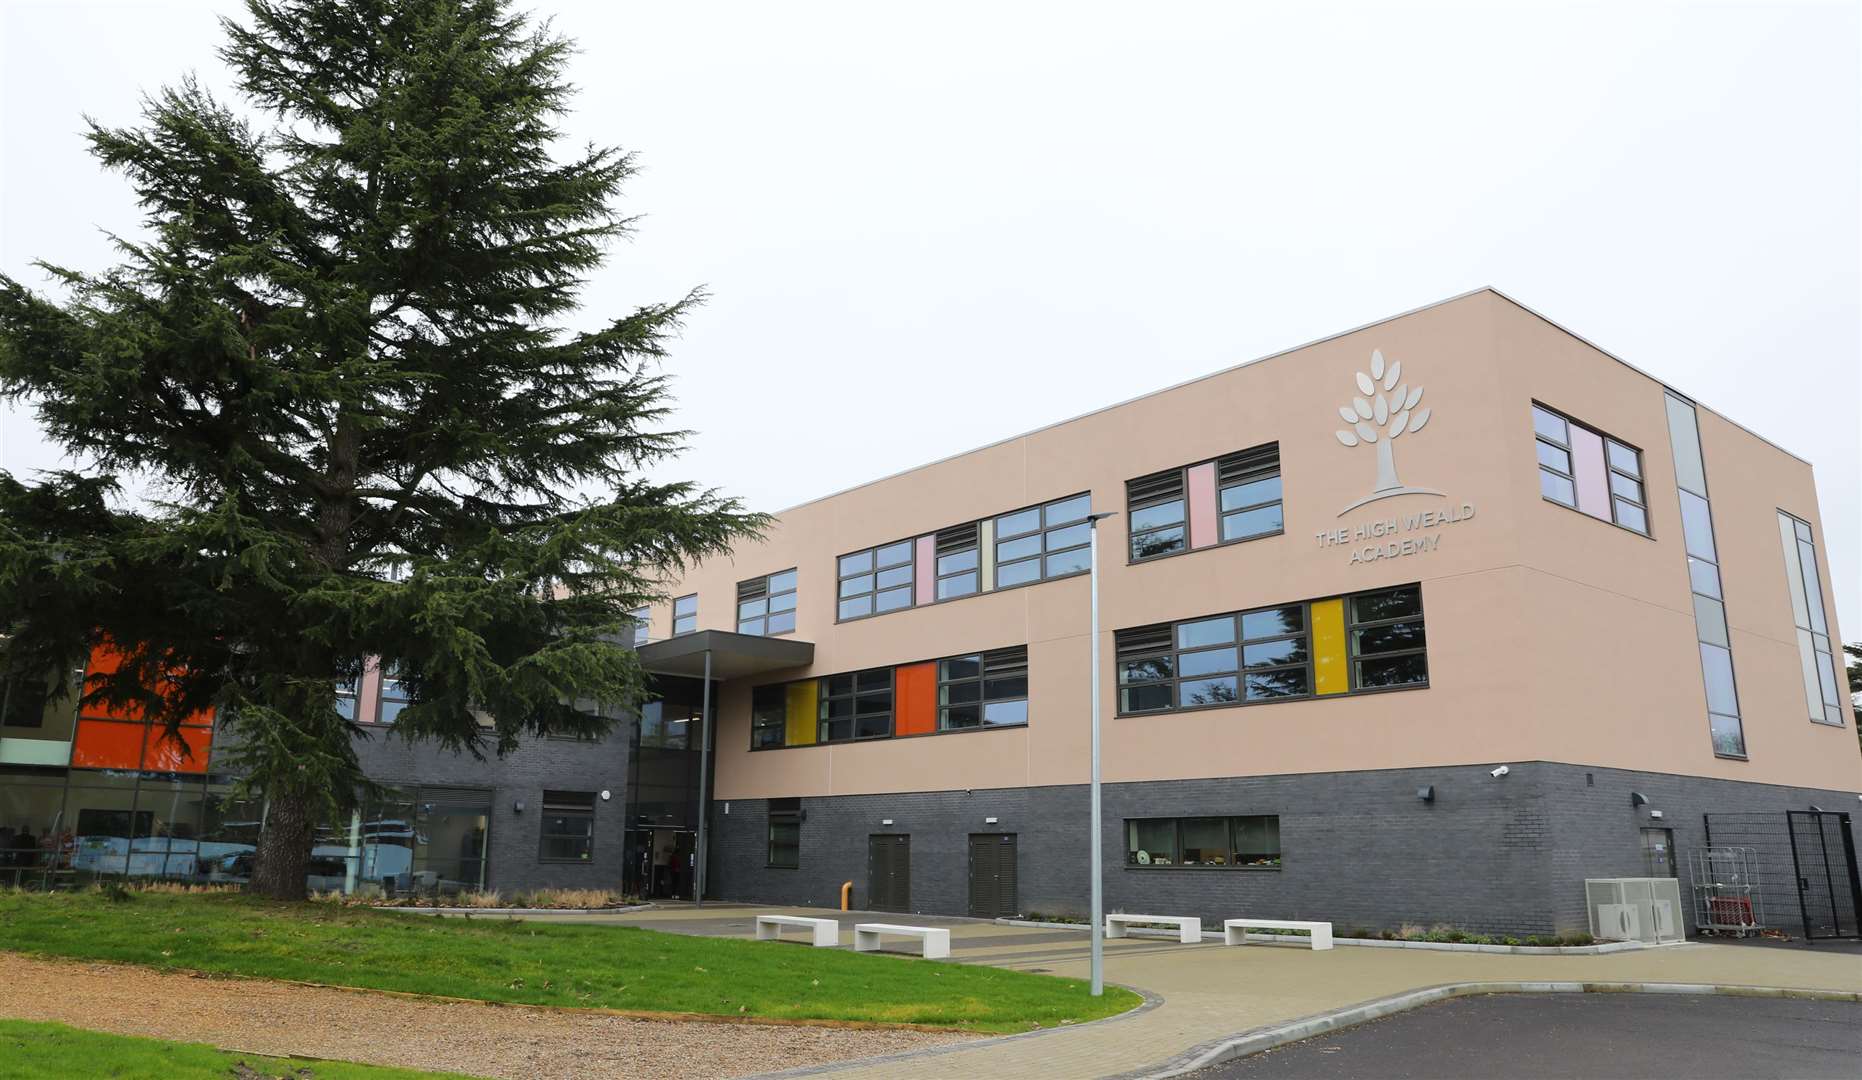 Plans have been announced to close High Weald Academy, in Cranbrook Picture: Andy Jones